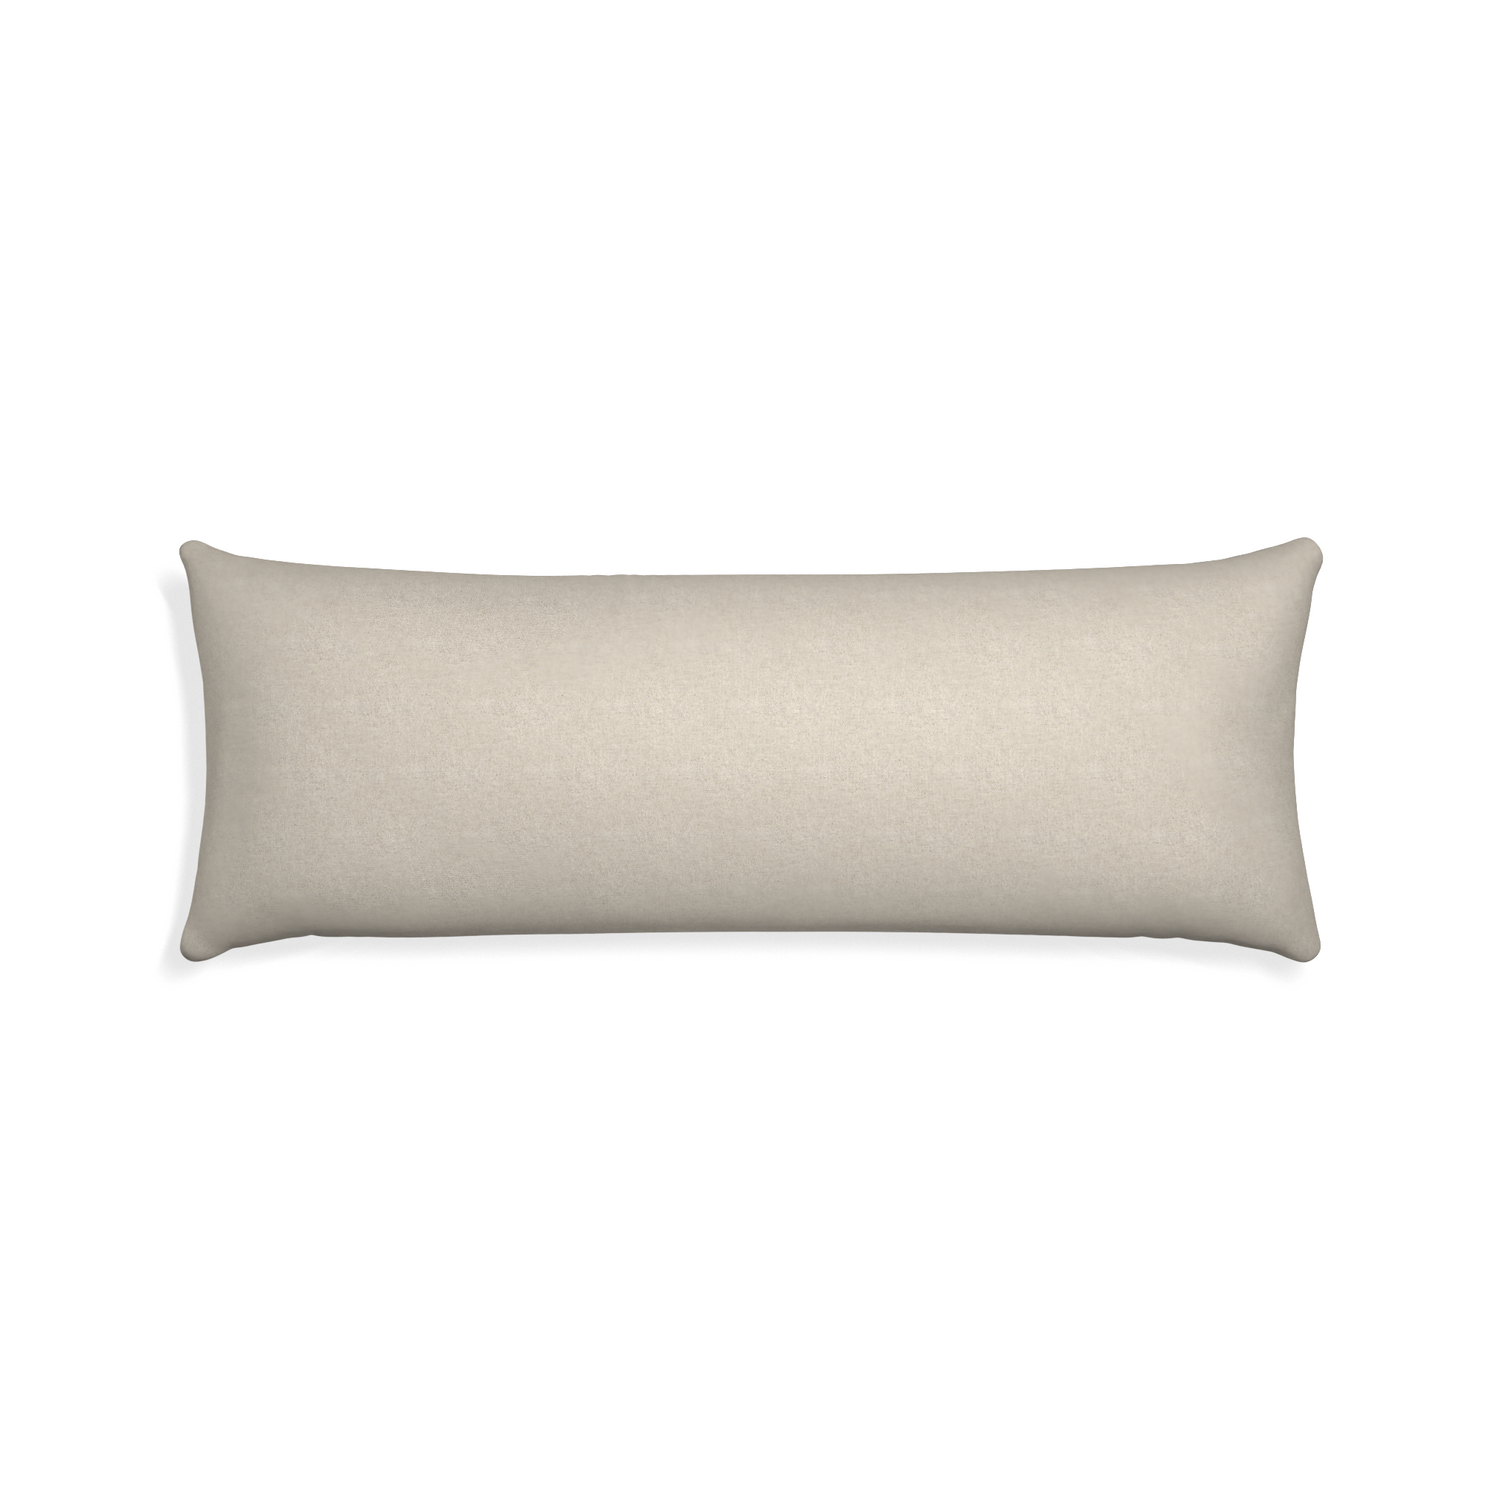 Xl-lumbar oat custom light brownpillow with none on white background